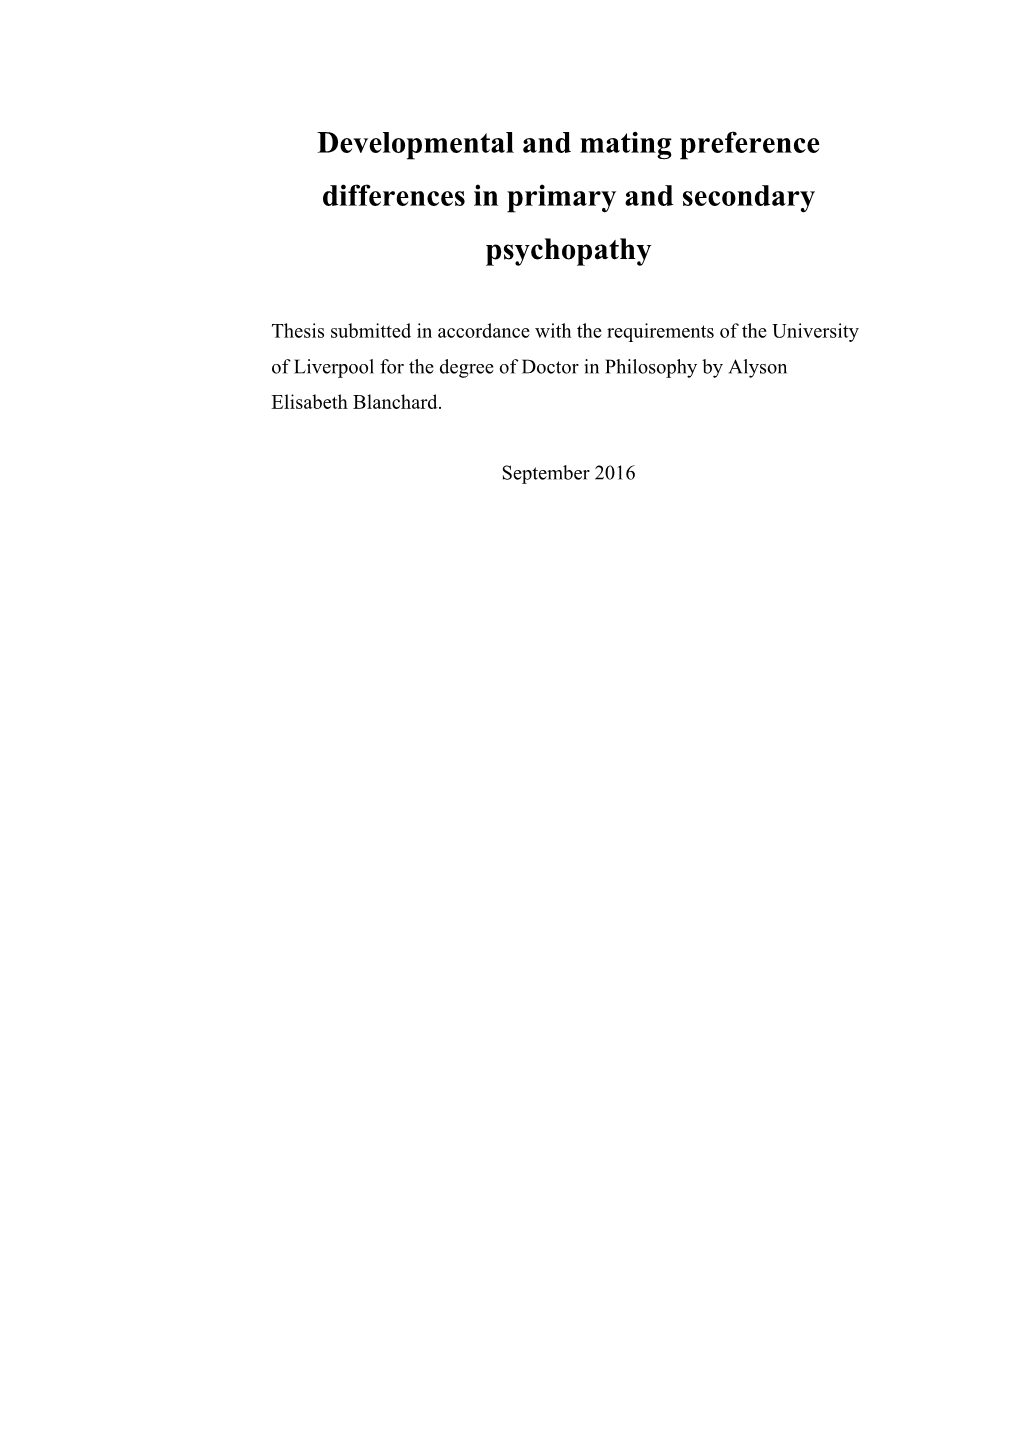 Developmental and Mating Preference Differences in Primary and Secondary Psychopathy